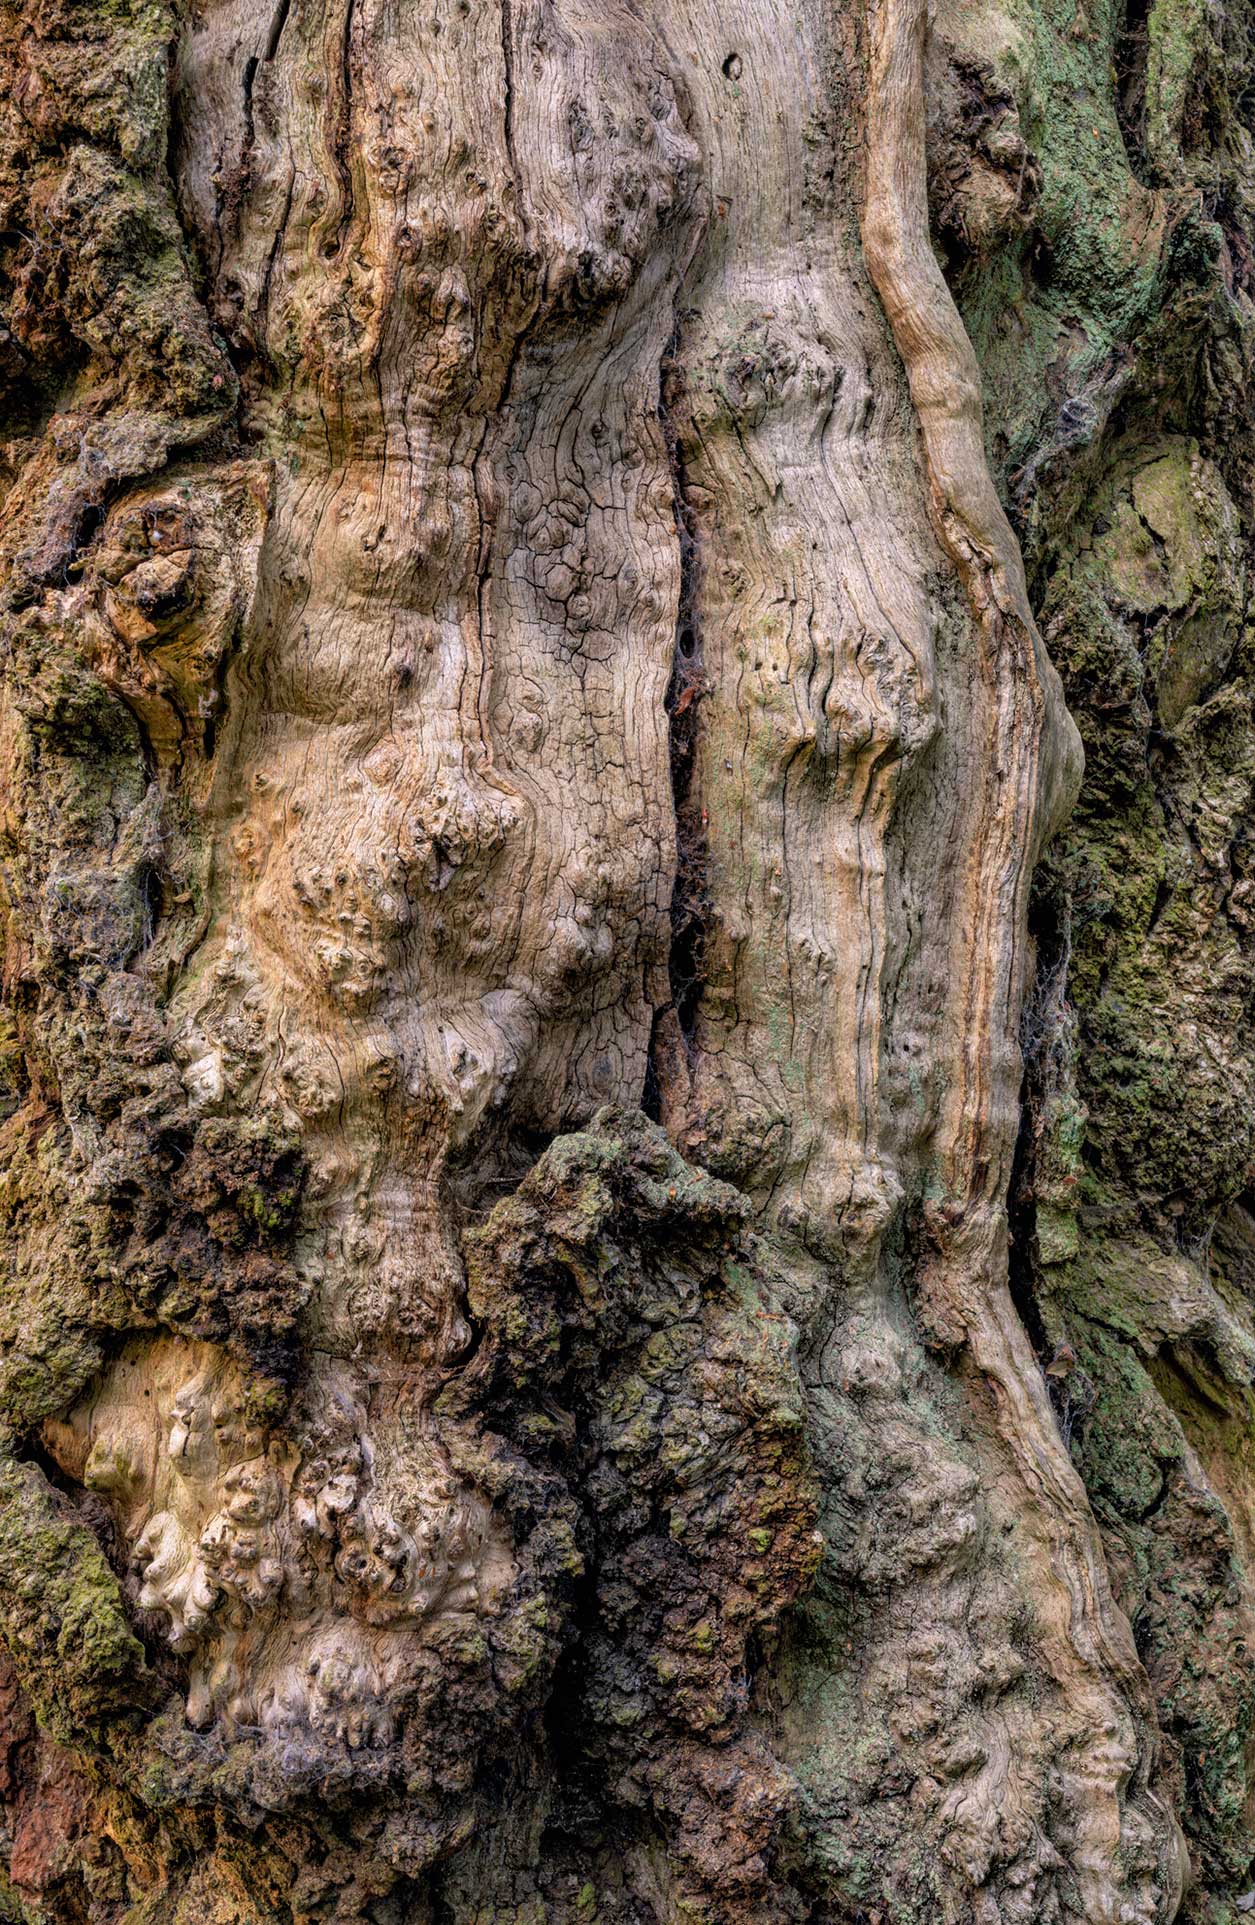 Close up of bark from an old tree. Credit Lizzie Shepherd.